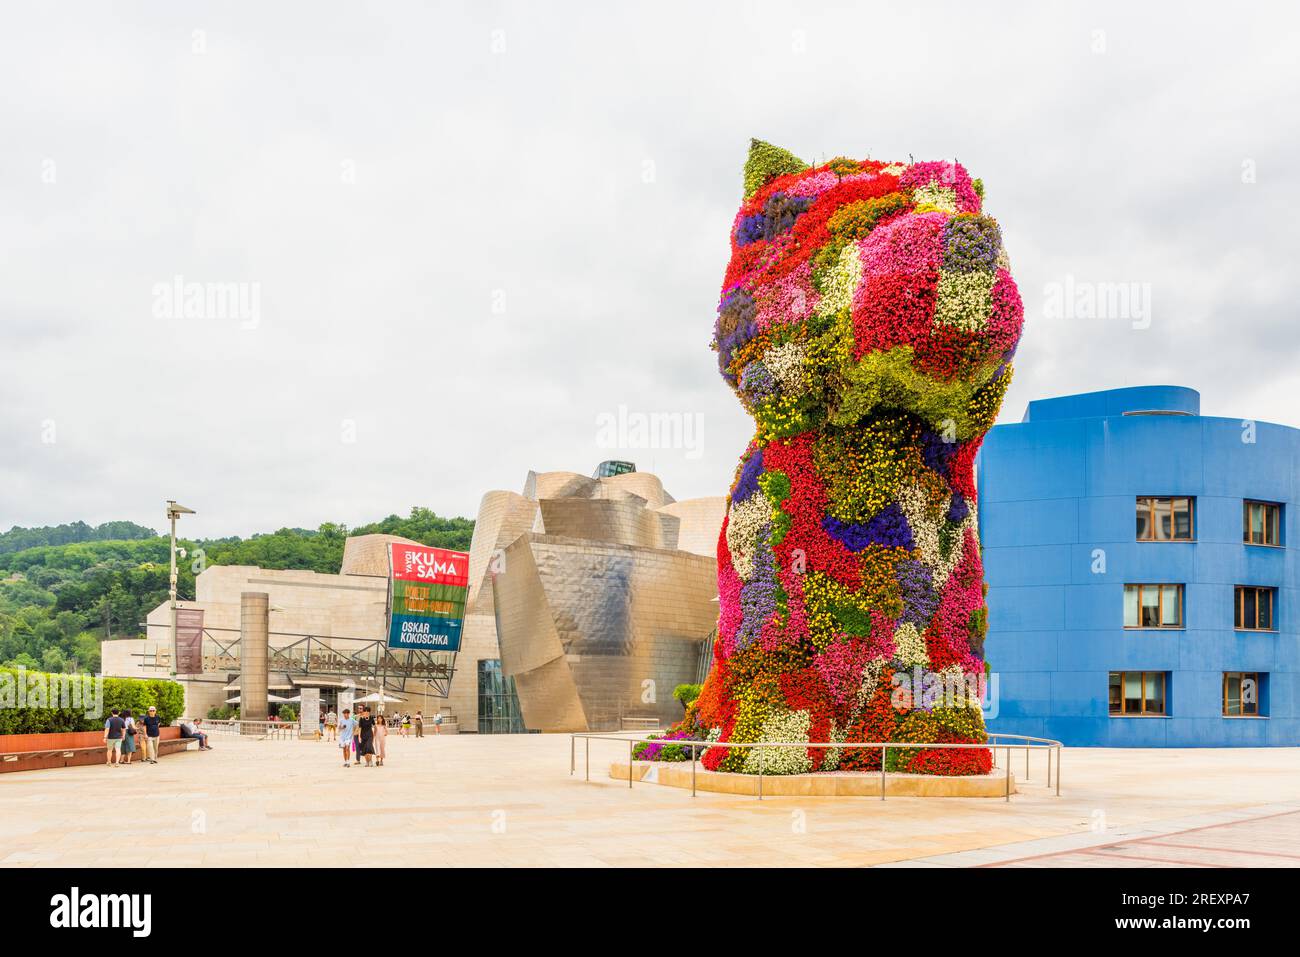 Puppy Floral Sculpture by Jeff Koons near the entrance of the Guggenheim Museum. It stands 12 meter tall and was made in 1992. Stock Photo